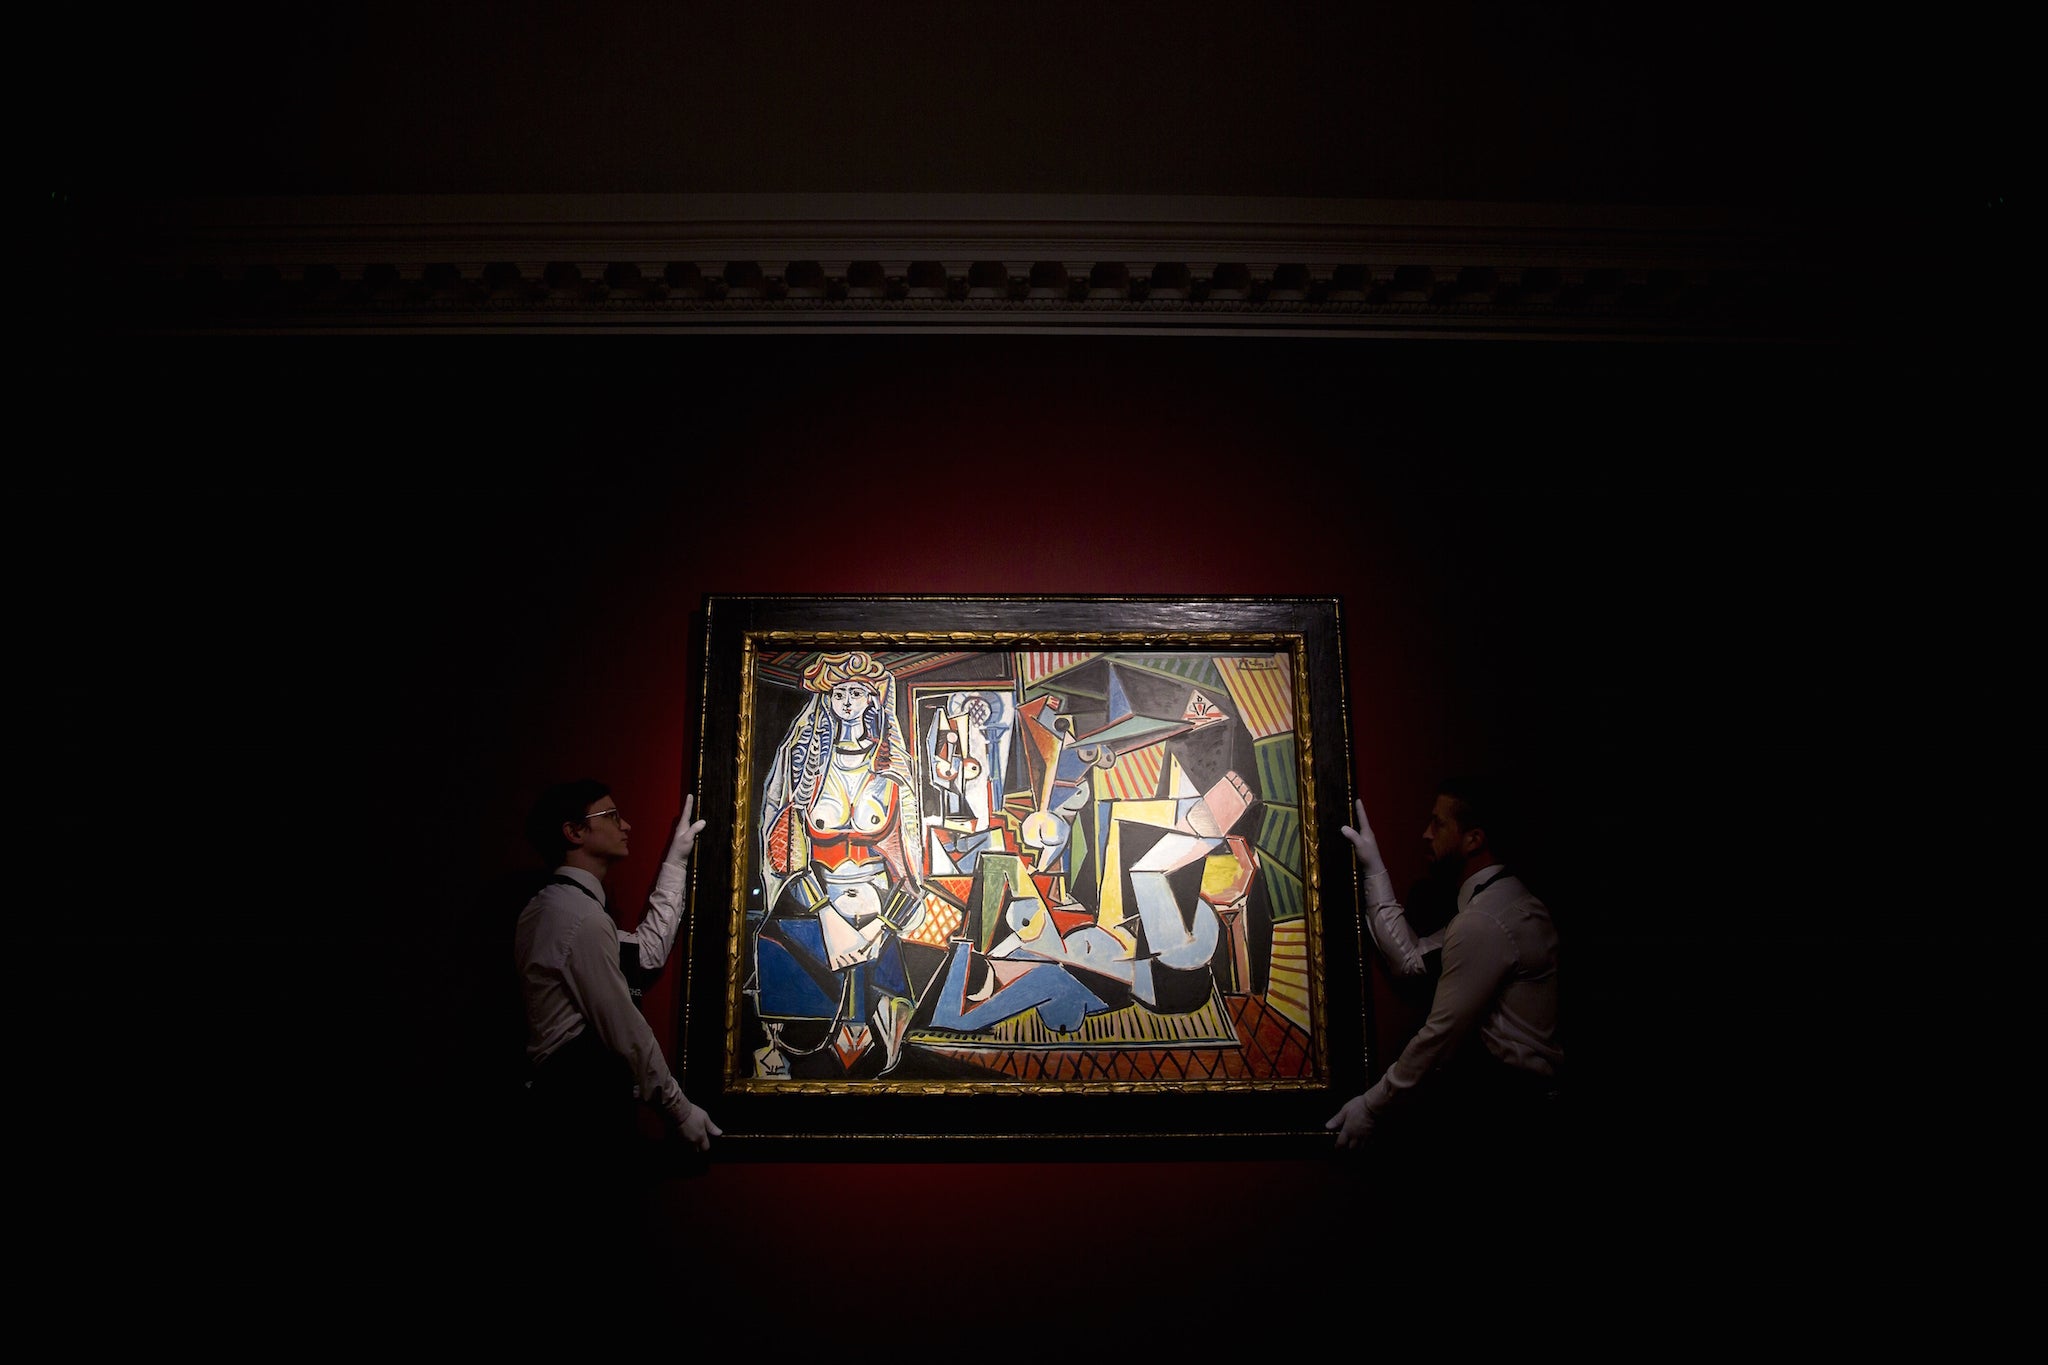 Christie's staff hold up Picasso's Les femmes d’Alger (version O) ahead of the auction